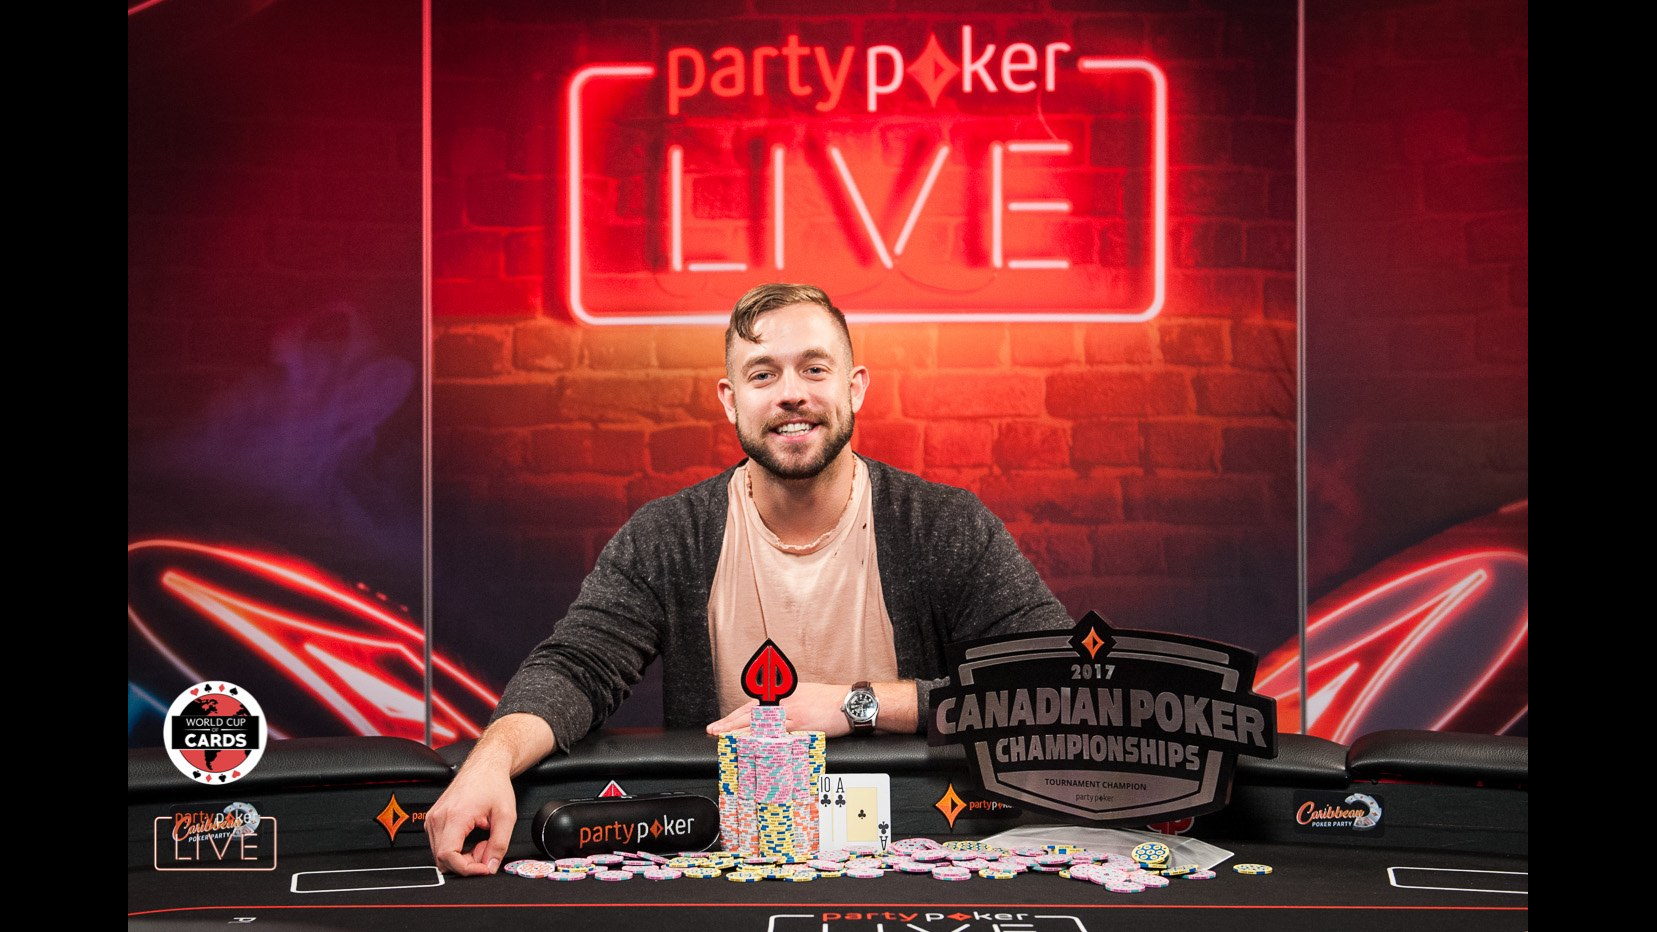 Kevin Rivest claims the throne in the Canadian Poker Championships!